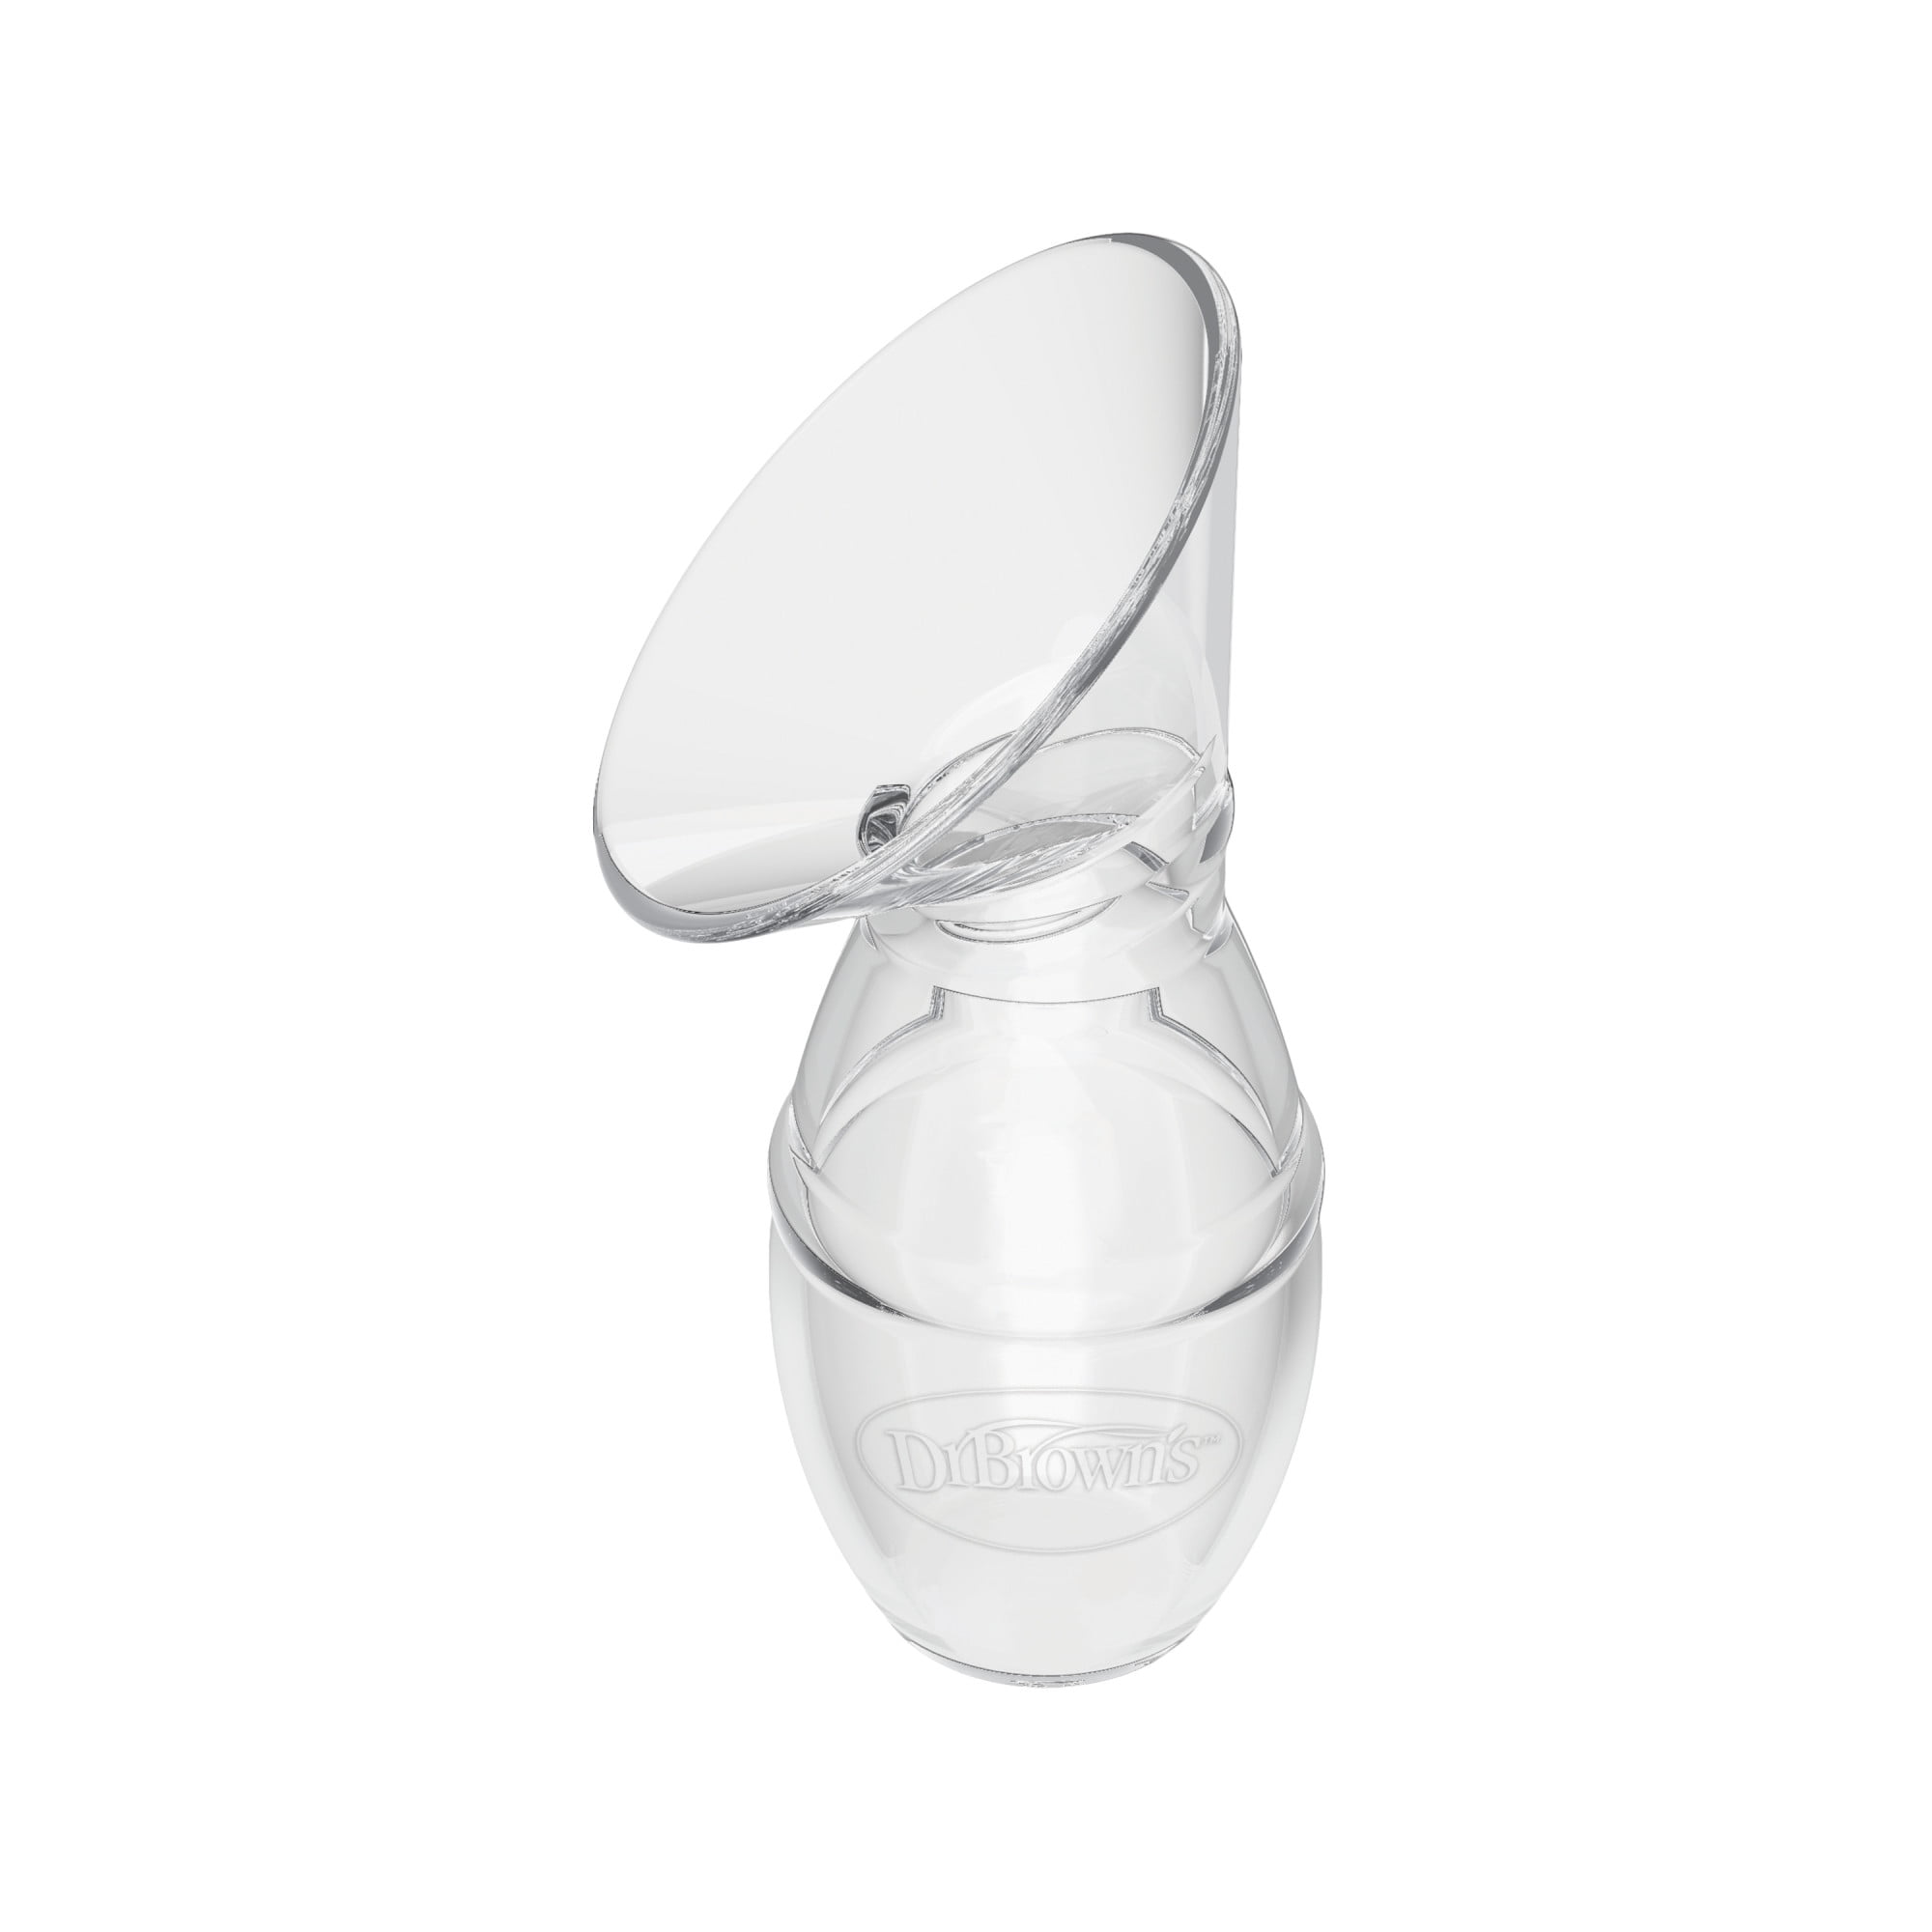 Monmartt - Dr. Brown's Soft Silicone Shield Manual Breast Pump